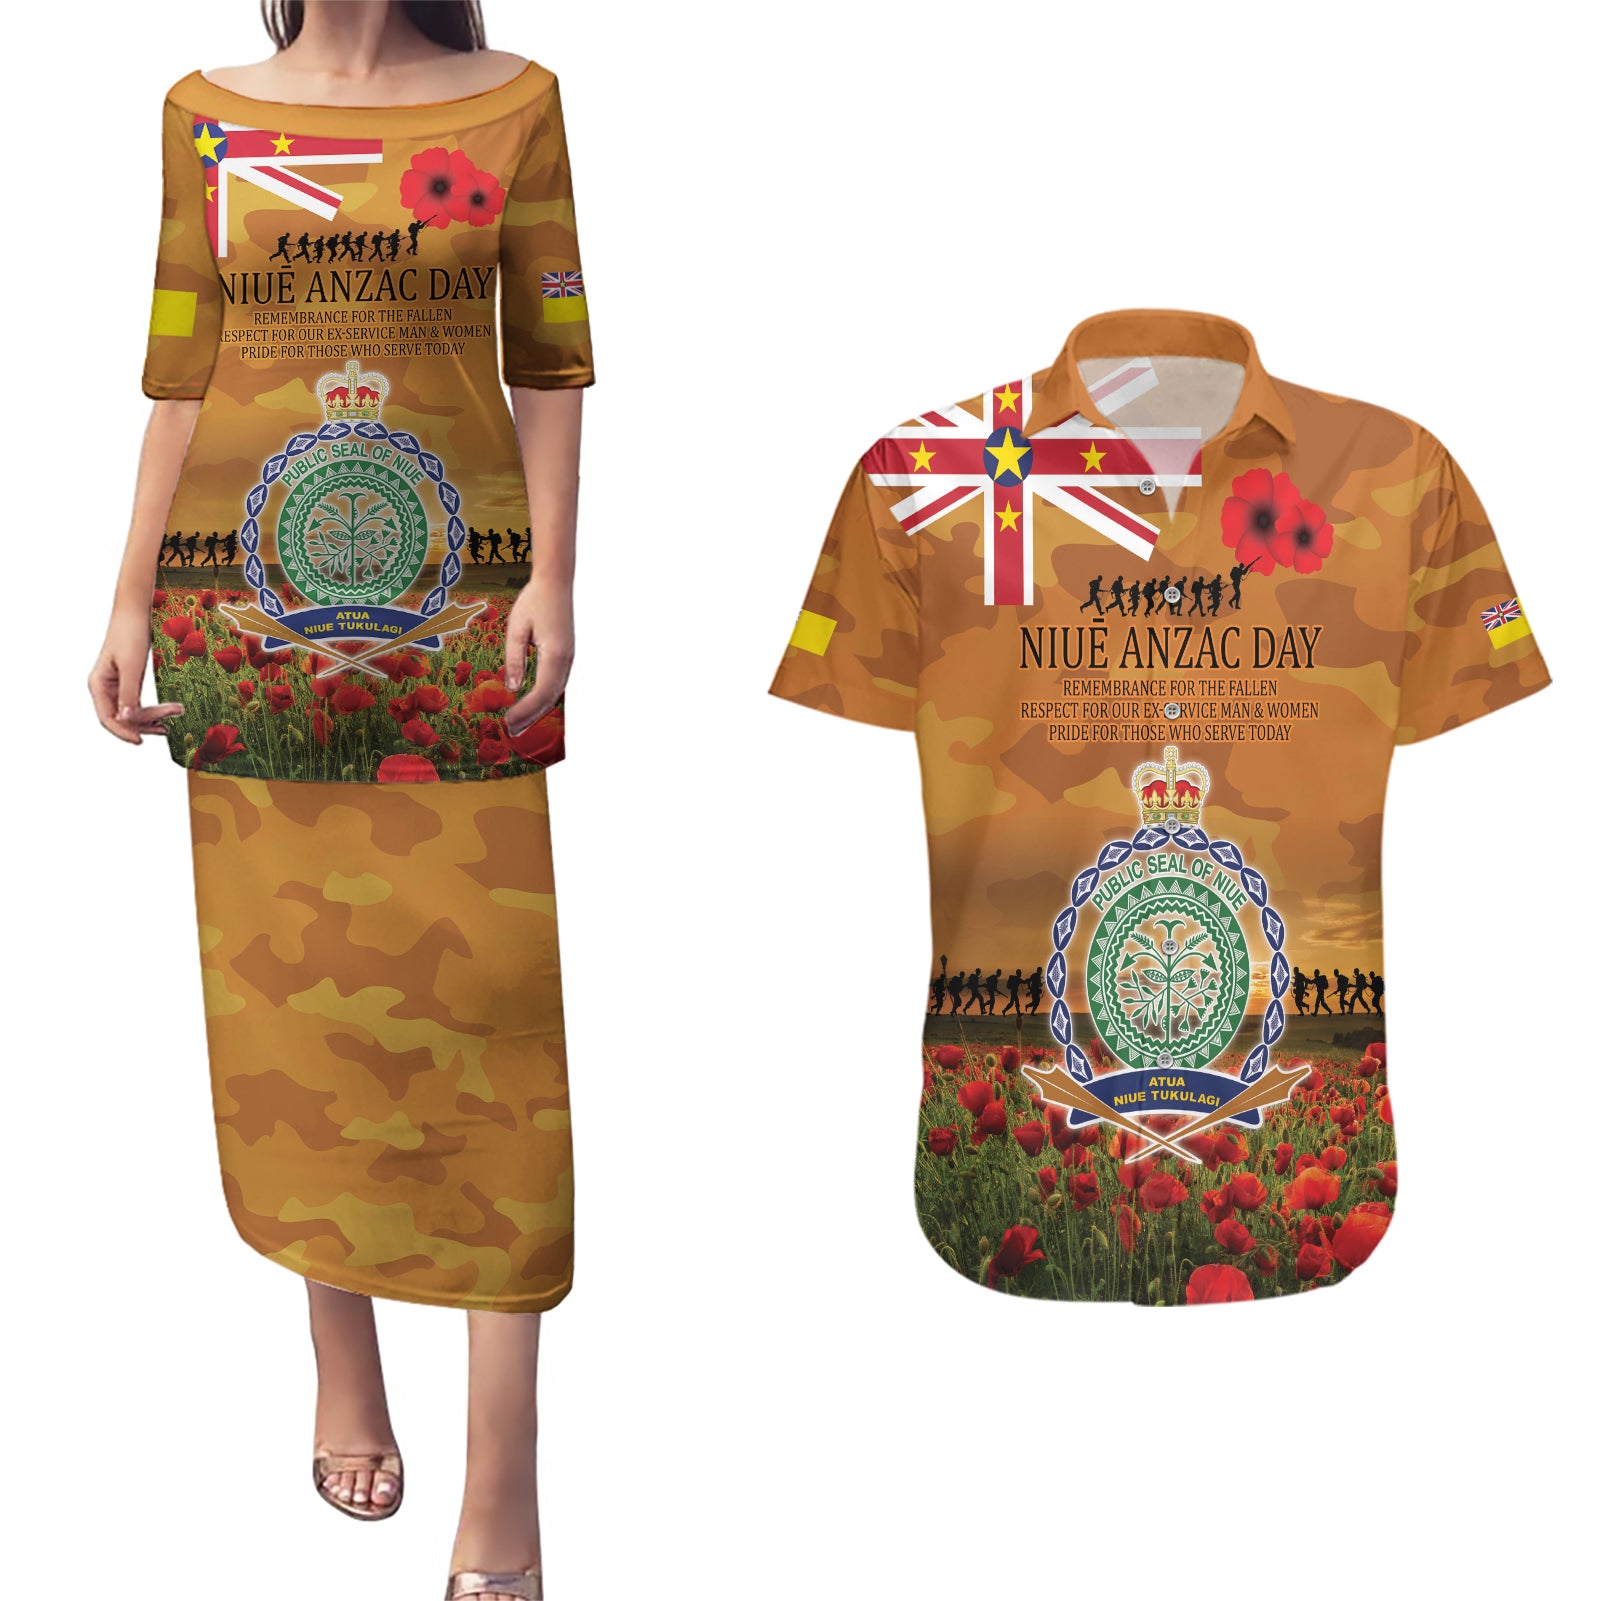 Niue ANZAC Day Personalised Couples Matching Puletasi and Hawaiian Shirt with Poppy Field LT9 Art - Polynesian Pride